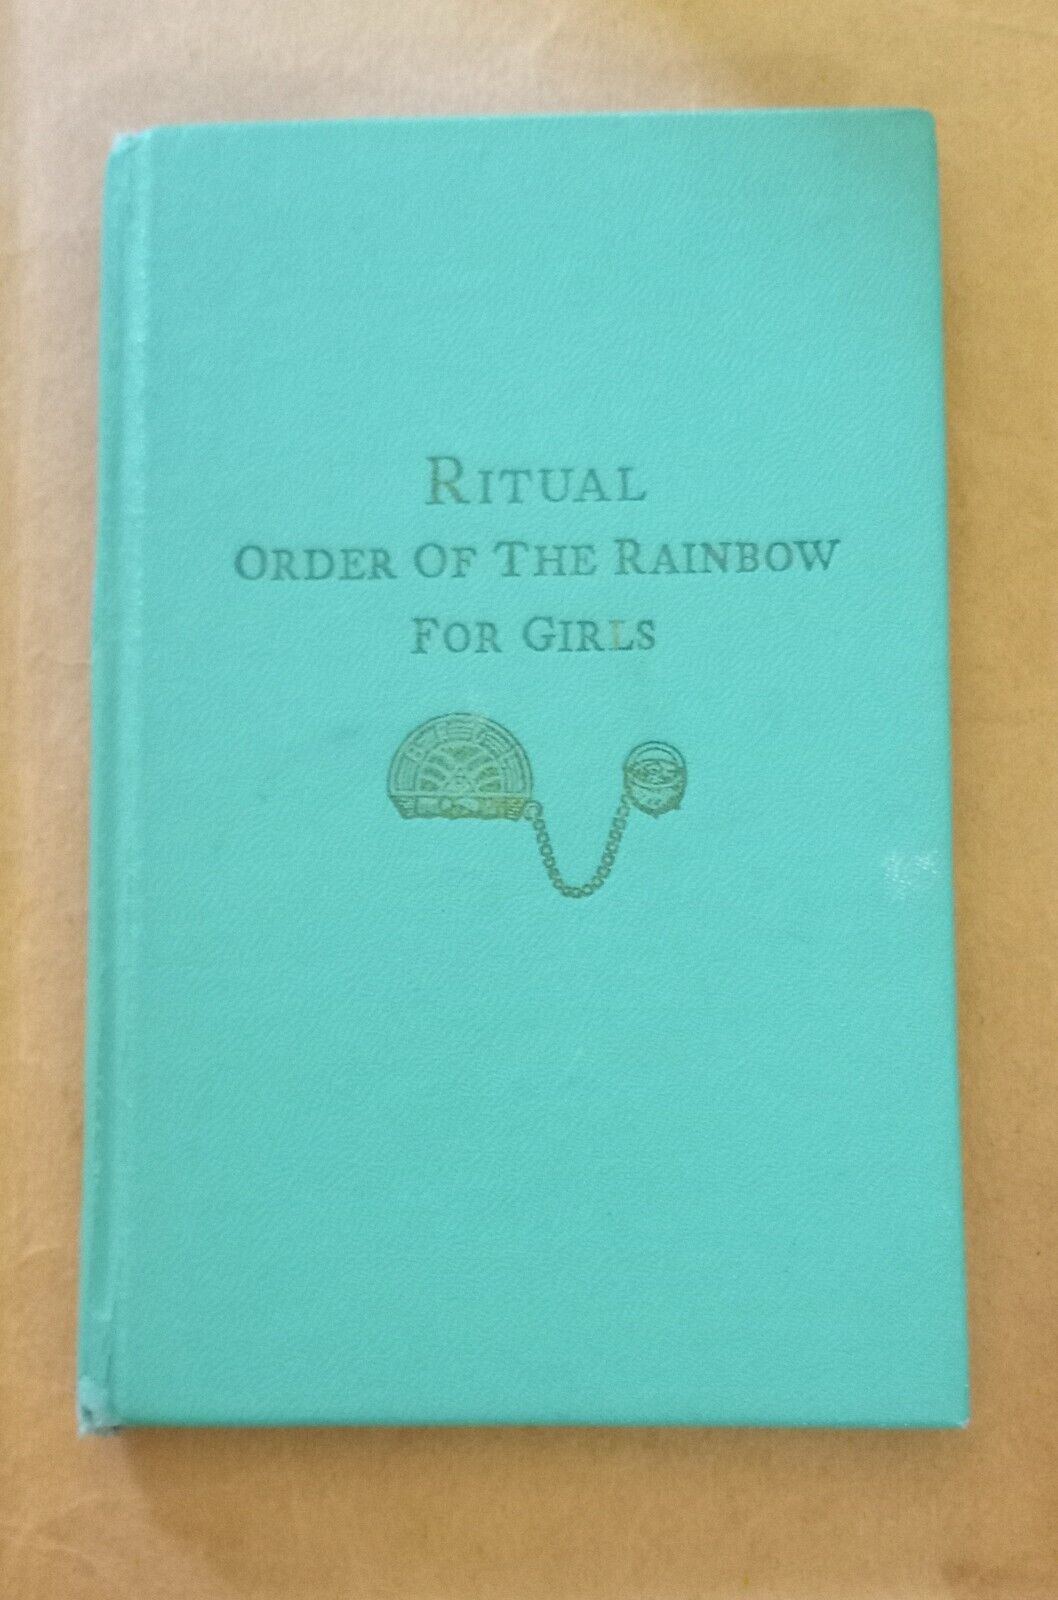 Vintage Ritual Order Of The Rainbow For Girls Free Mason Book